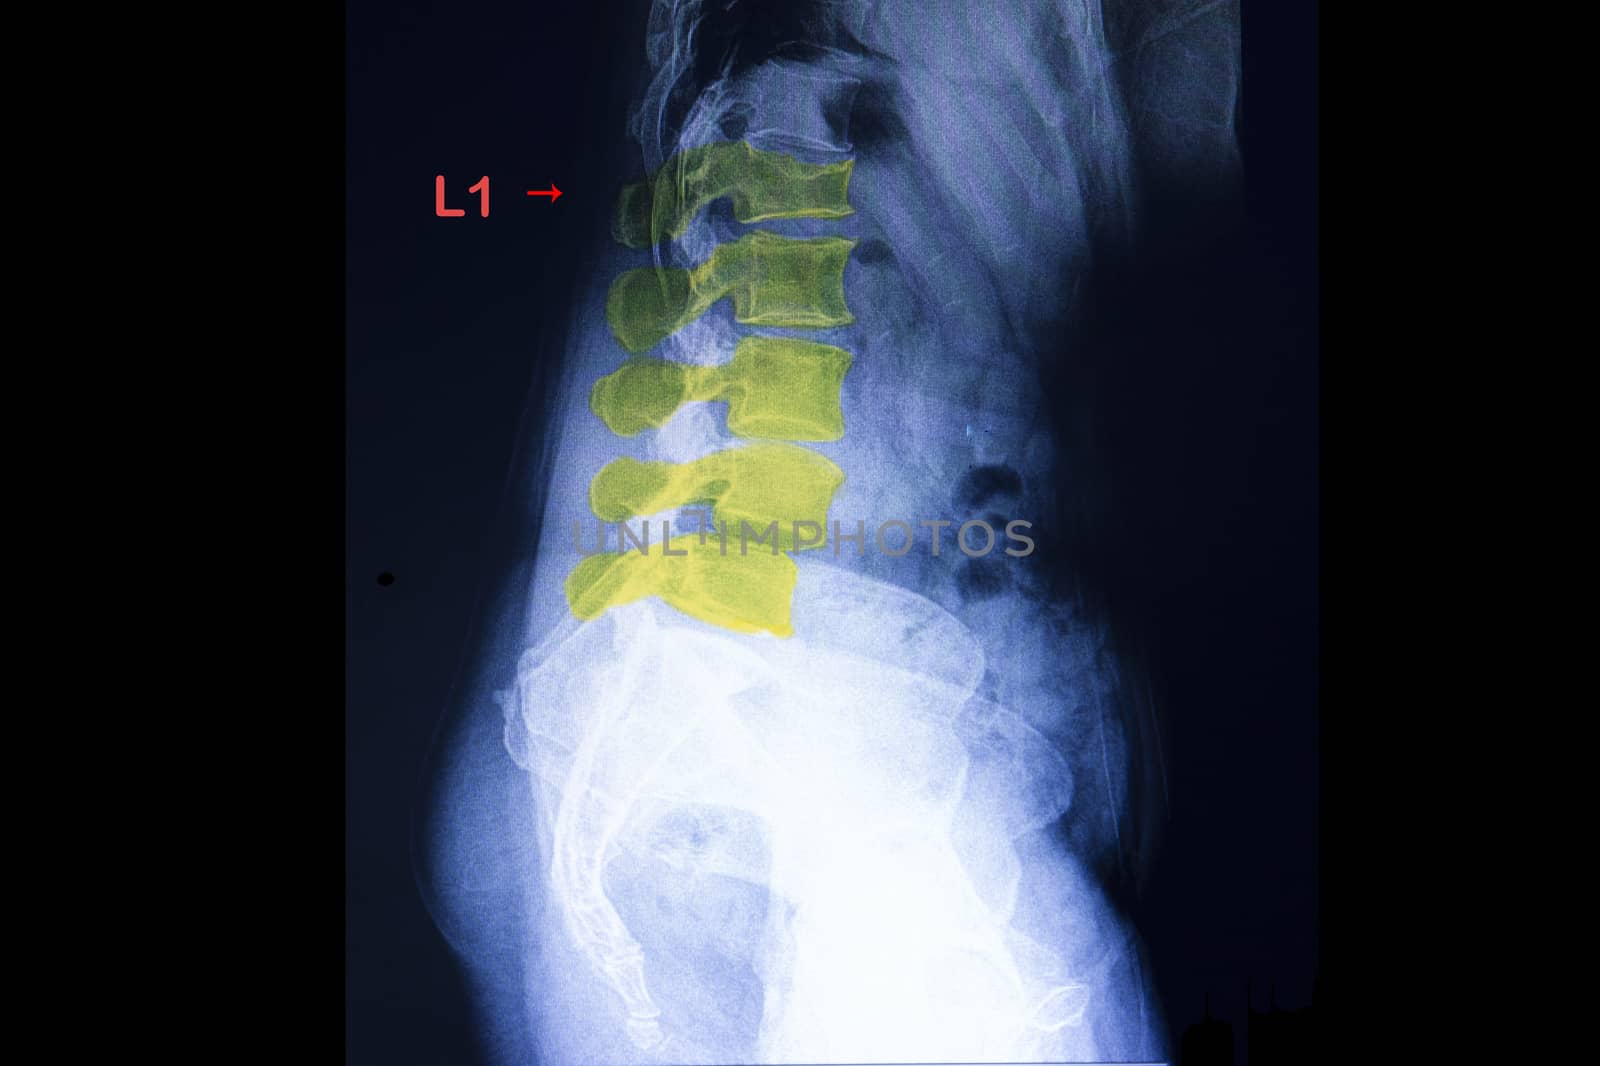 compression fracture of lambar spine by Nawoot